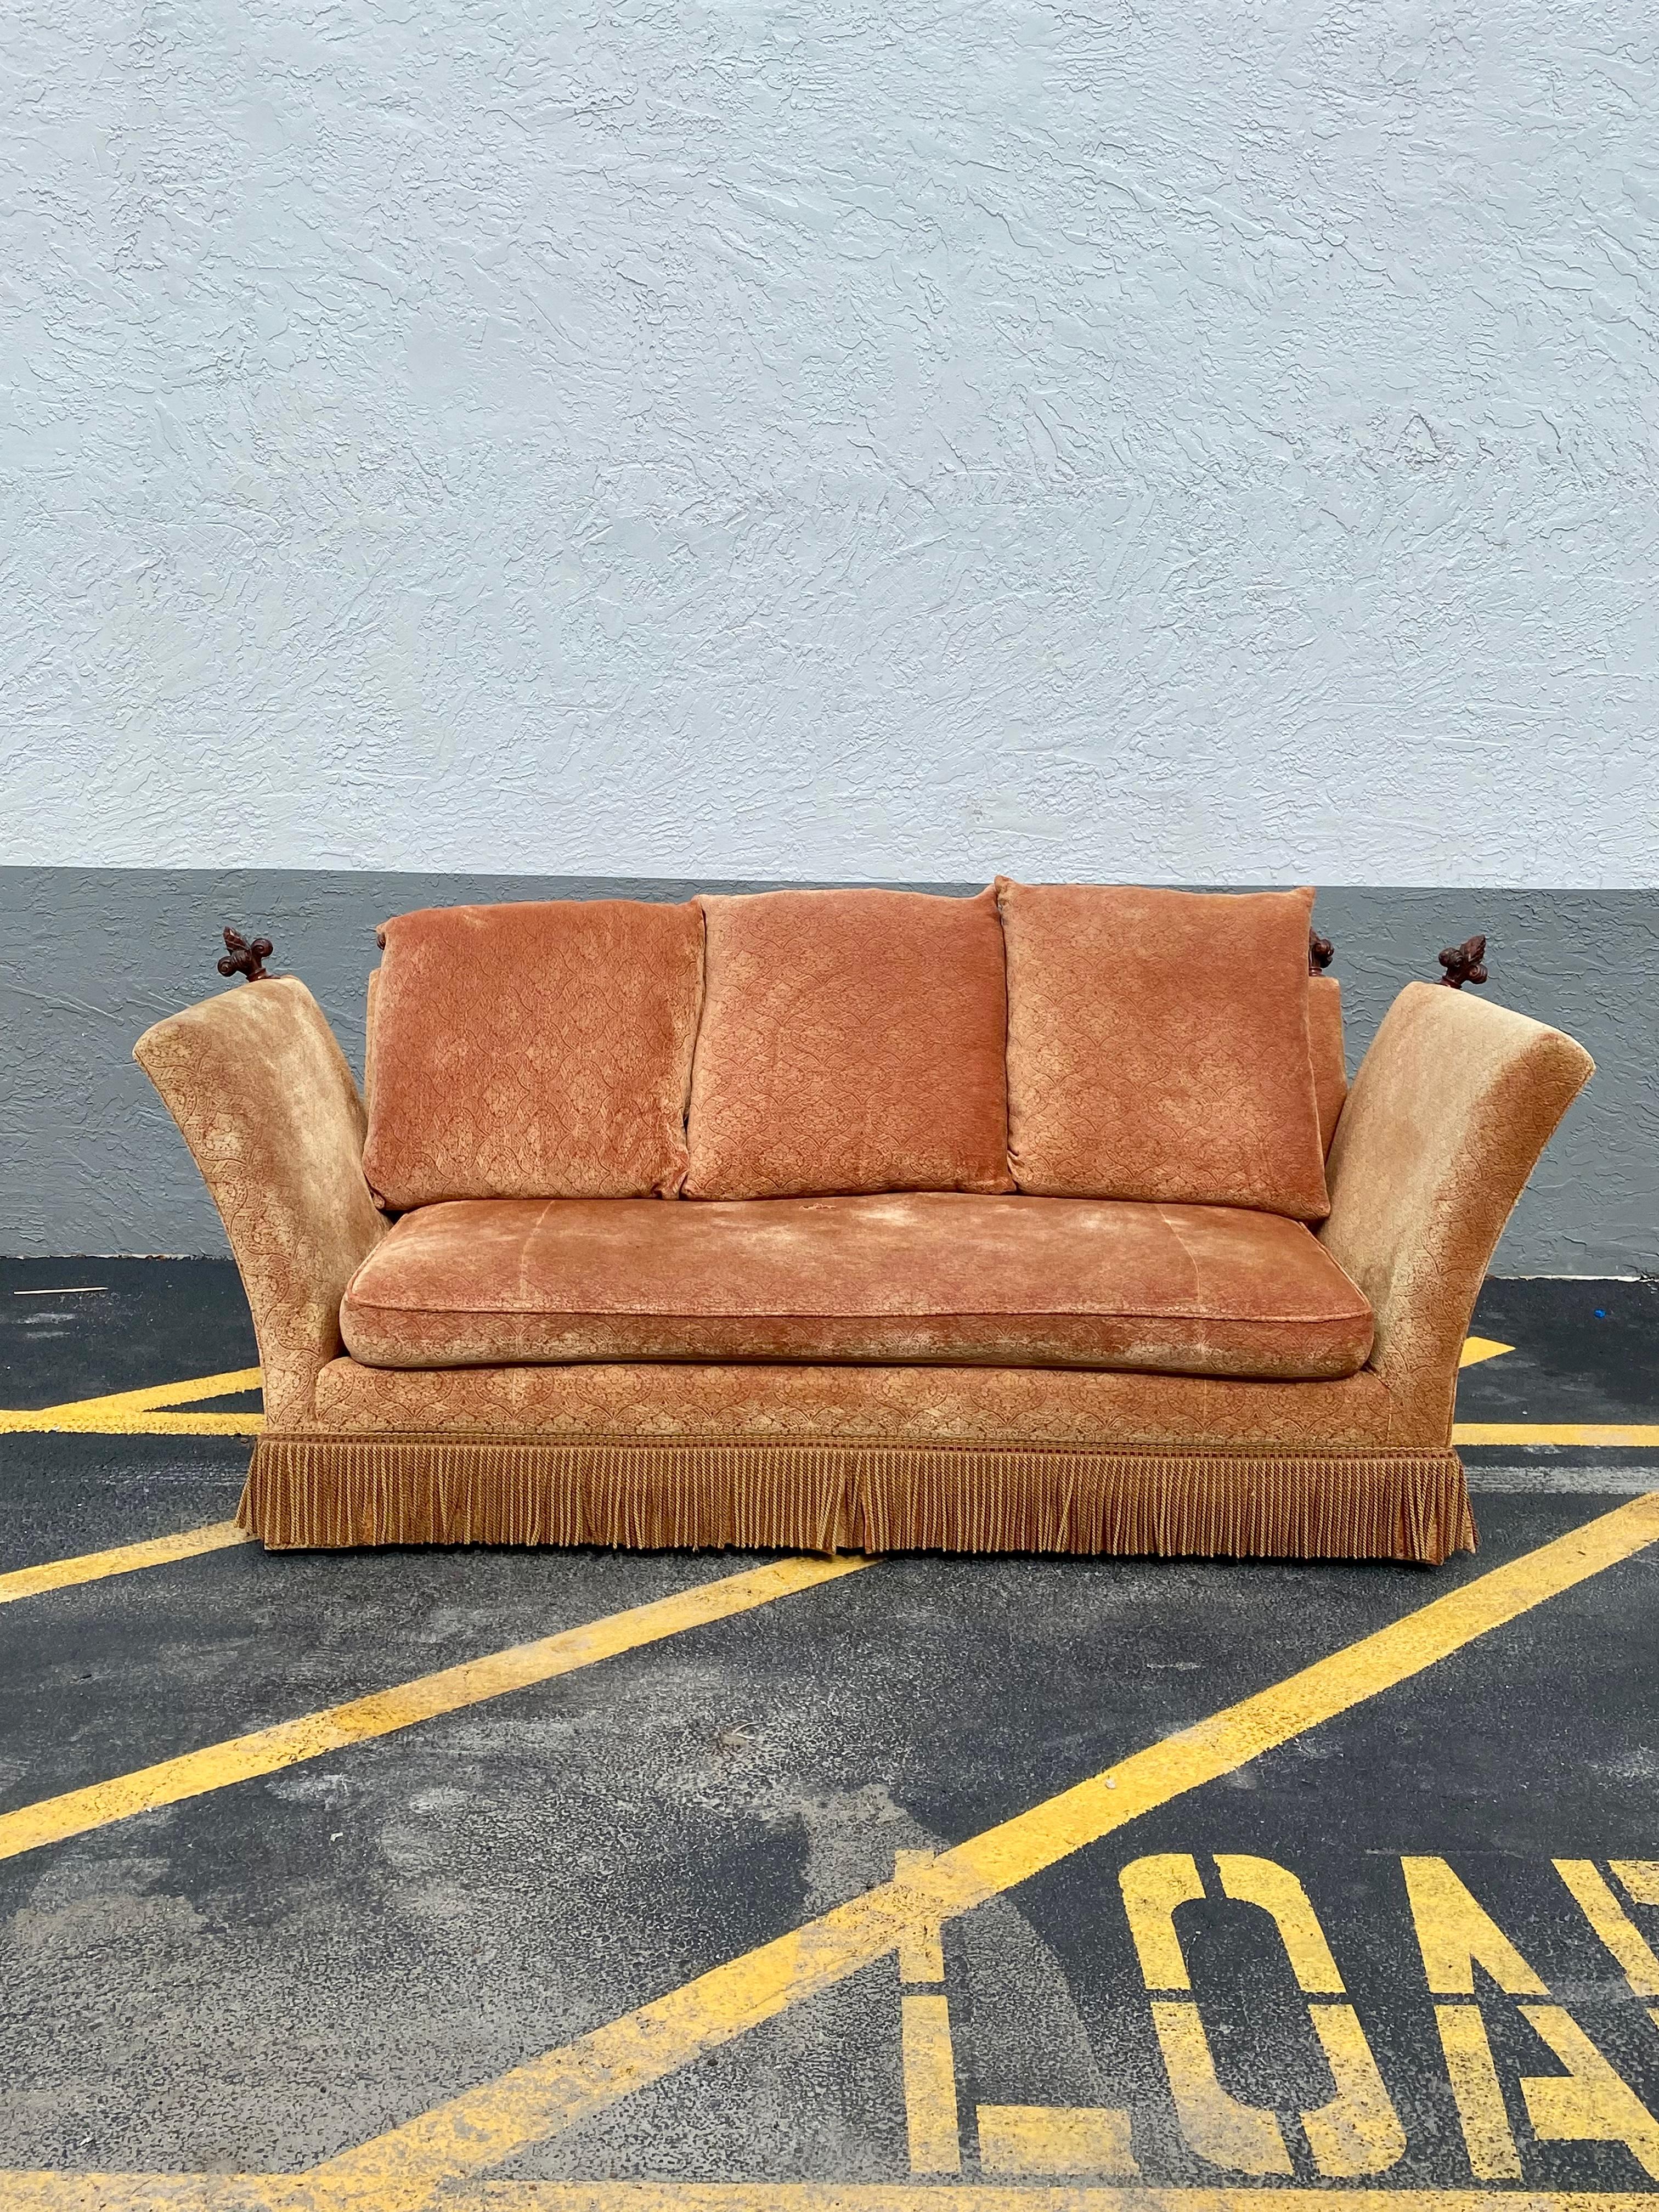 On offer on this occasion is one of the most stunning and rare Knole sofa you could hope to find. Outstanding design is exhibited throughout. The beautiful sofa is statement piece which is also extremely comfortable and packed with personality!!